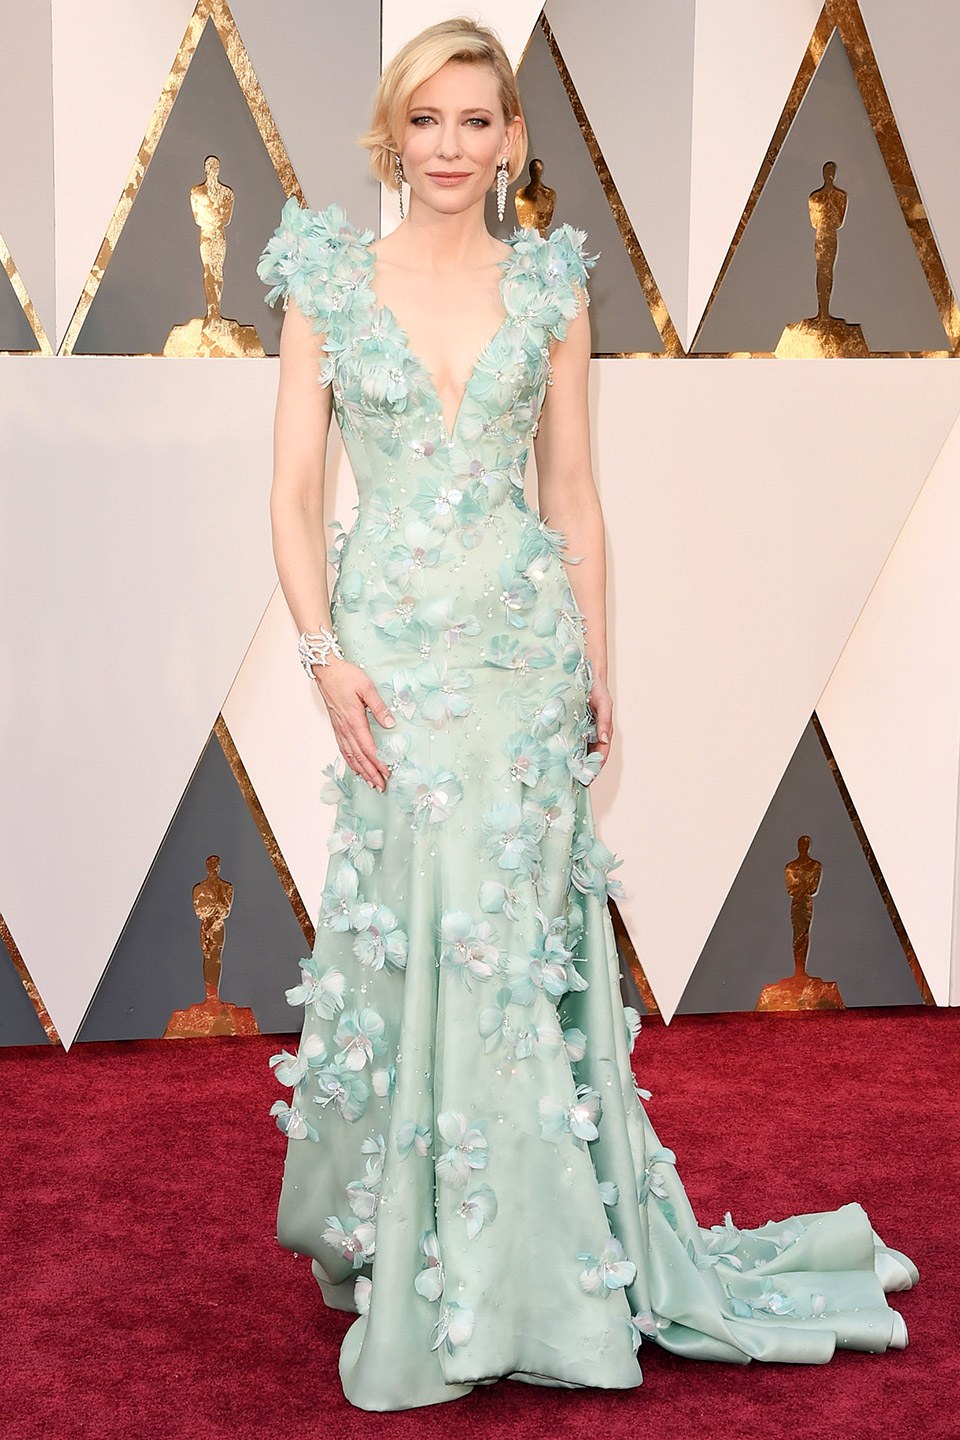 oscars-red-carpet-2016-best-dressed-cate-blanchett Top Best 5 Red Carpet Looks in The 88th Academy Award